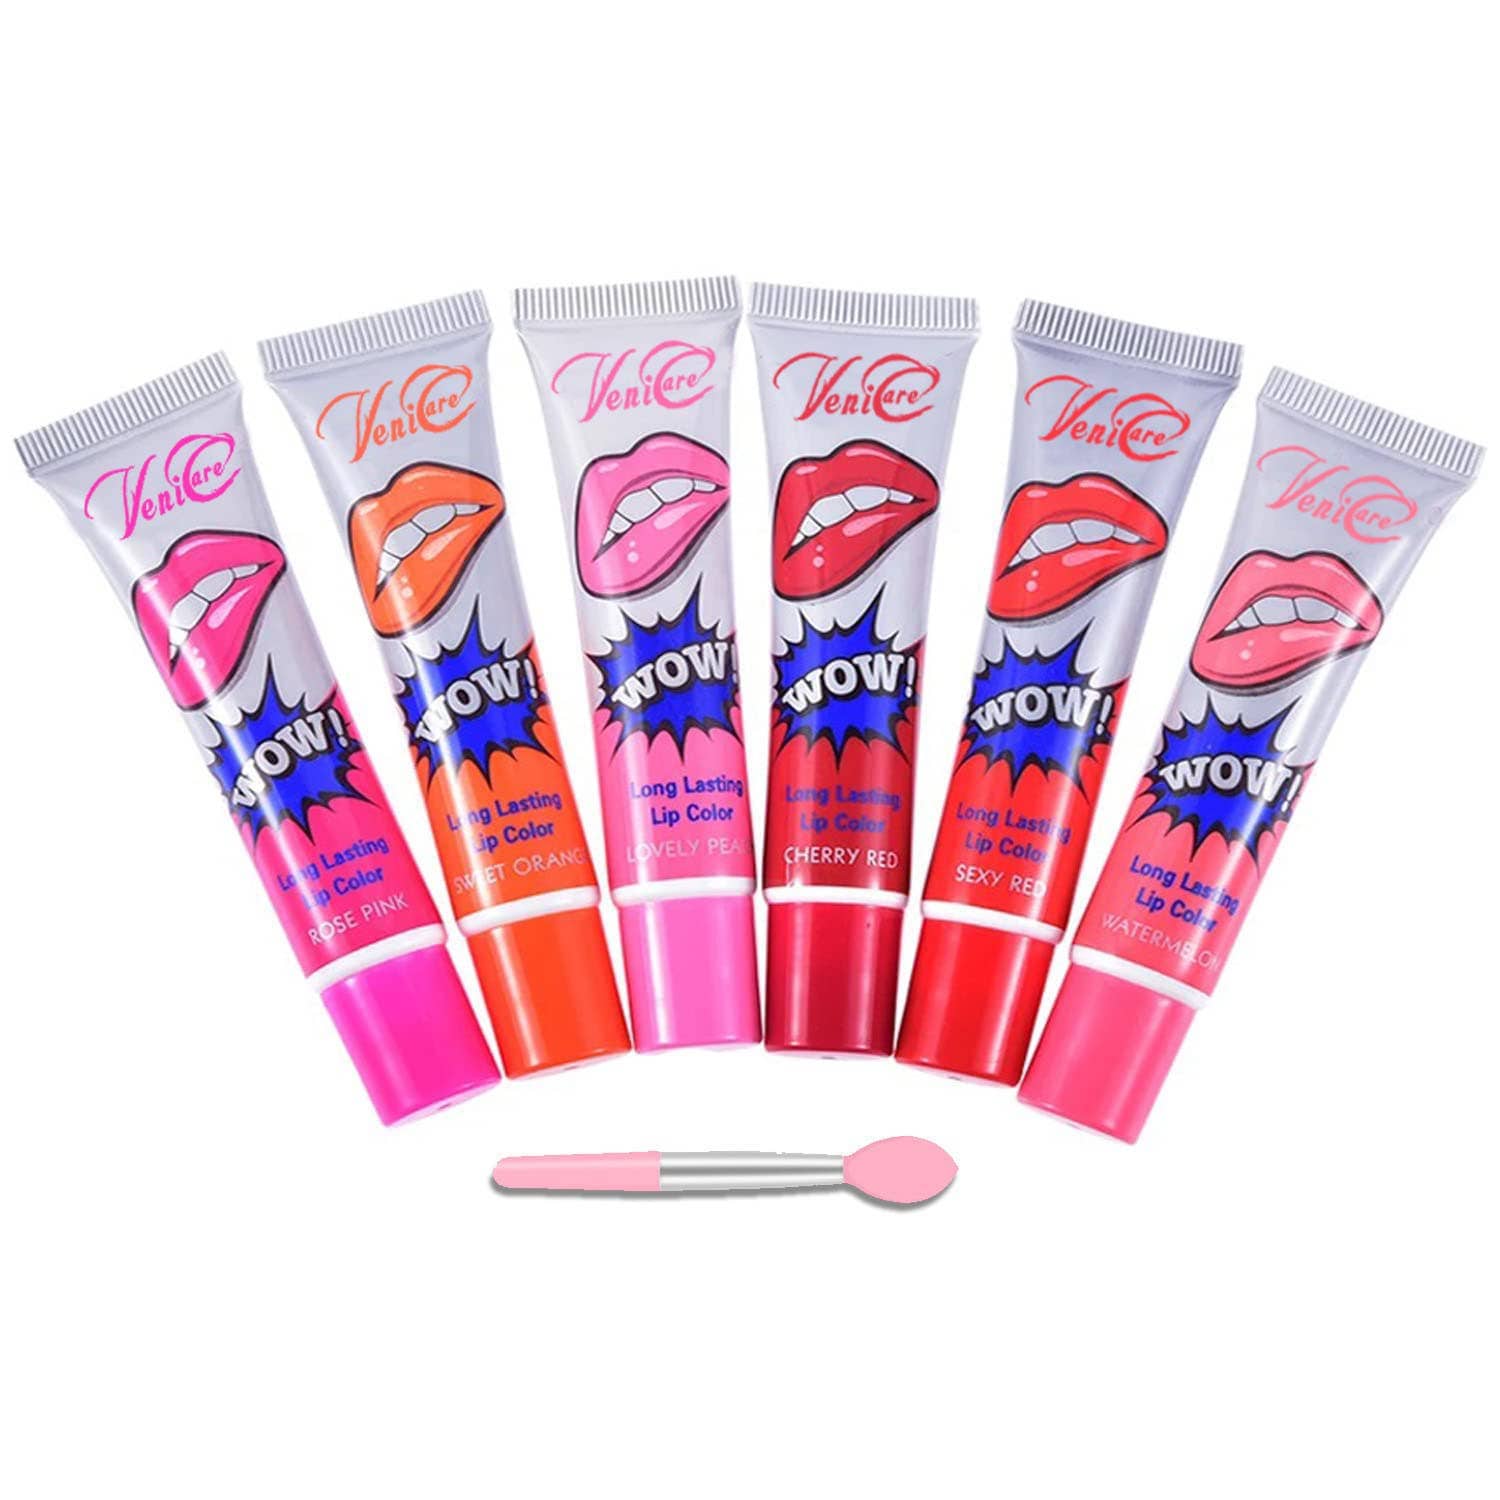 Sexyy Red Lip Gloss Line Features Colors Based on 'Pound Town